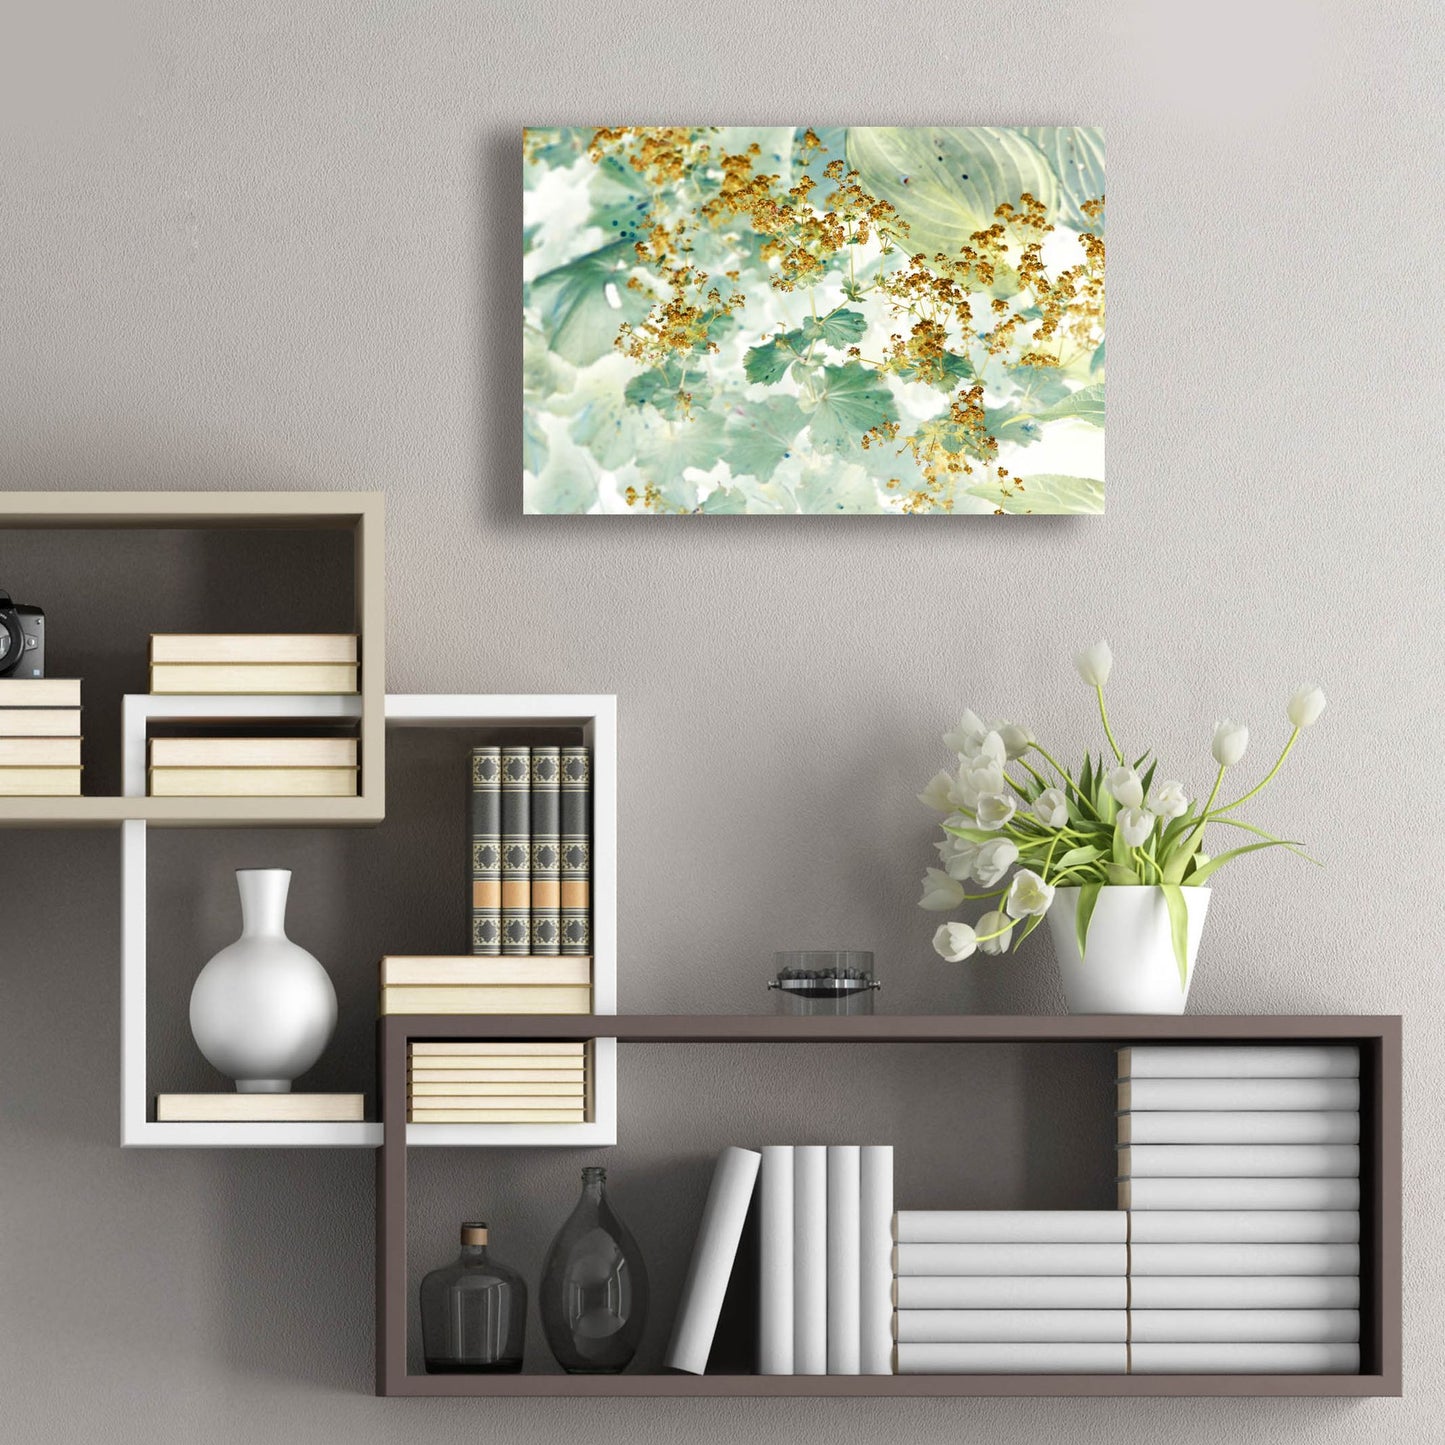 Epic Art ' Golden Lady's Mantle' by Judy Stalus, Acrylic Glass Wall Art,24x16